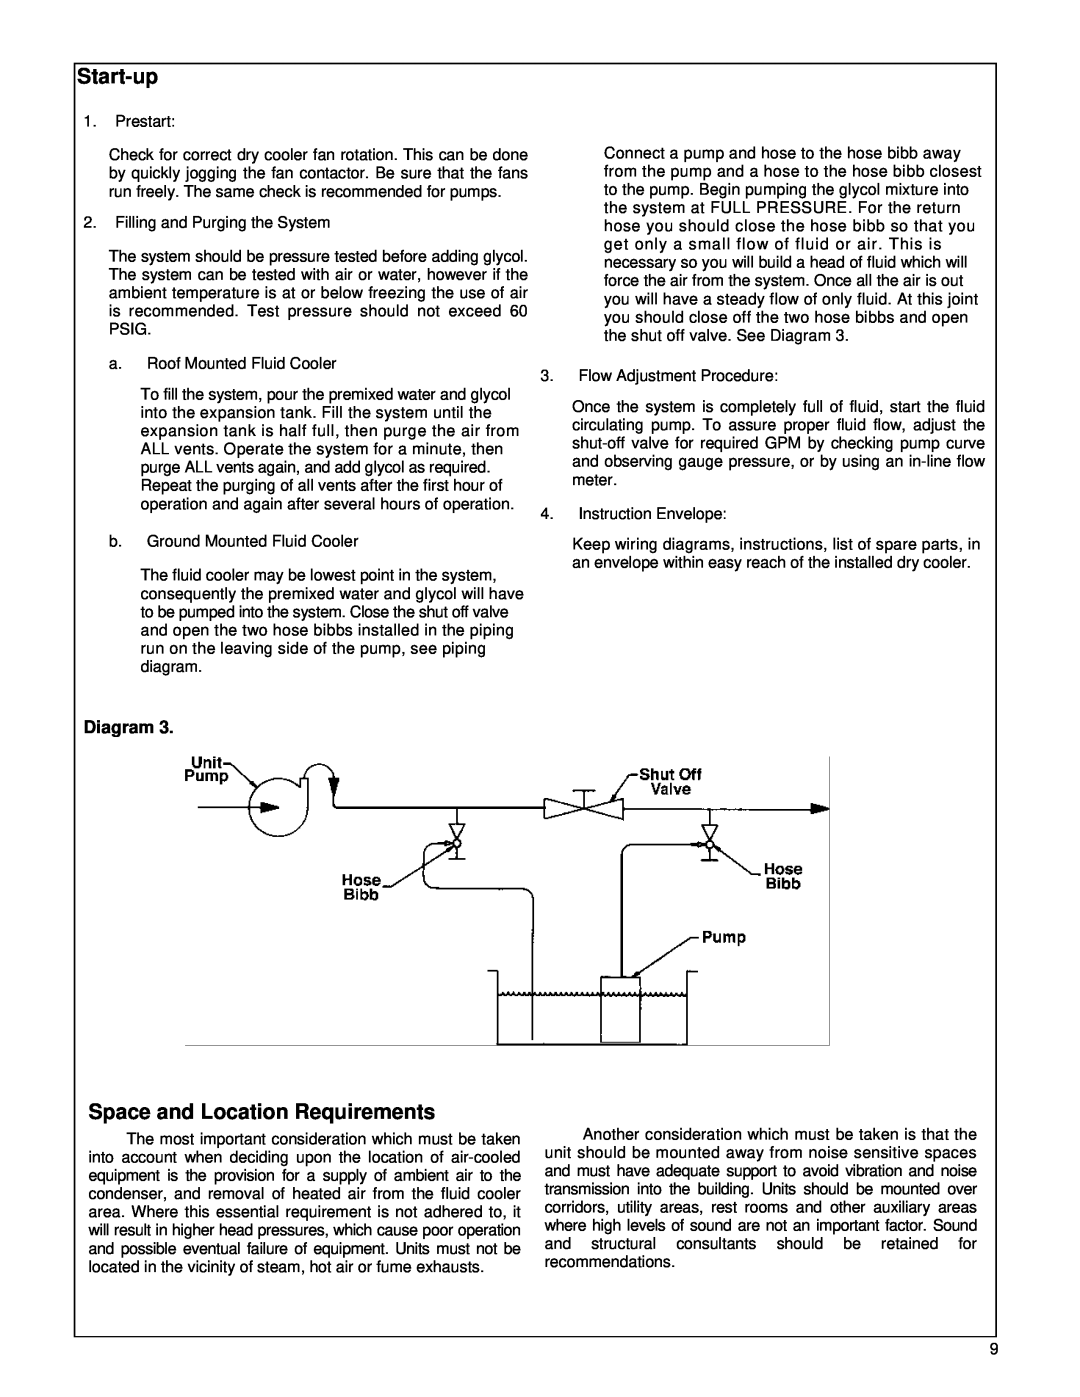 Sterling 25001301, SC3-600 warranty Start-up, Space and Location Requirements, Diagram 